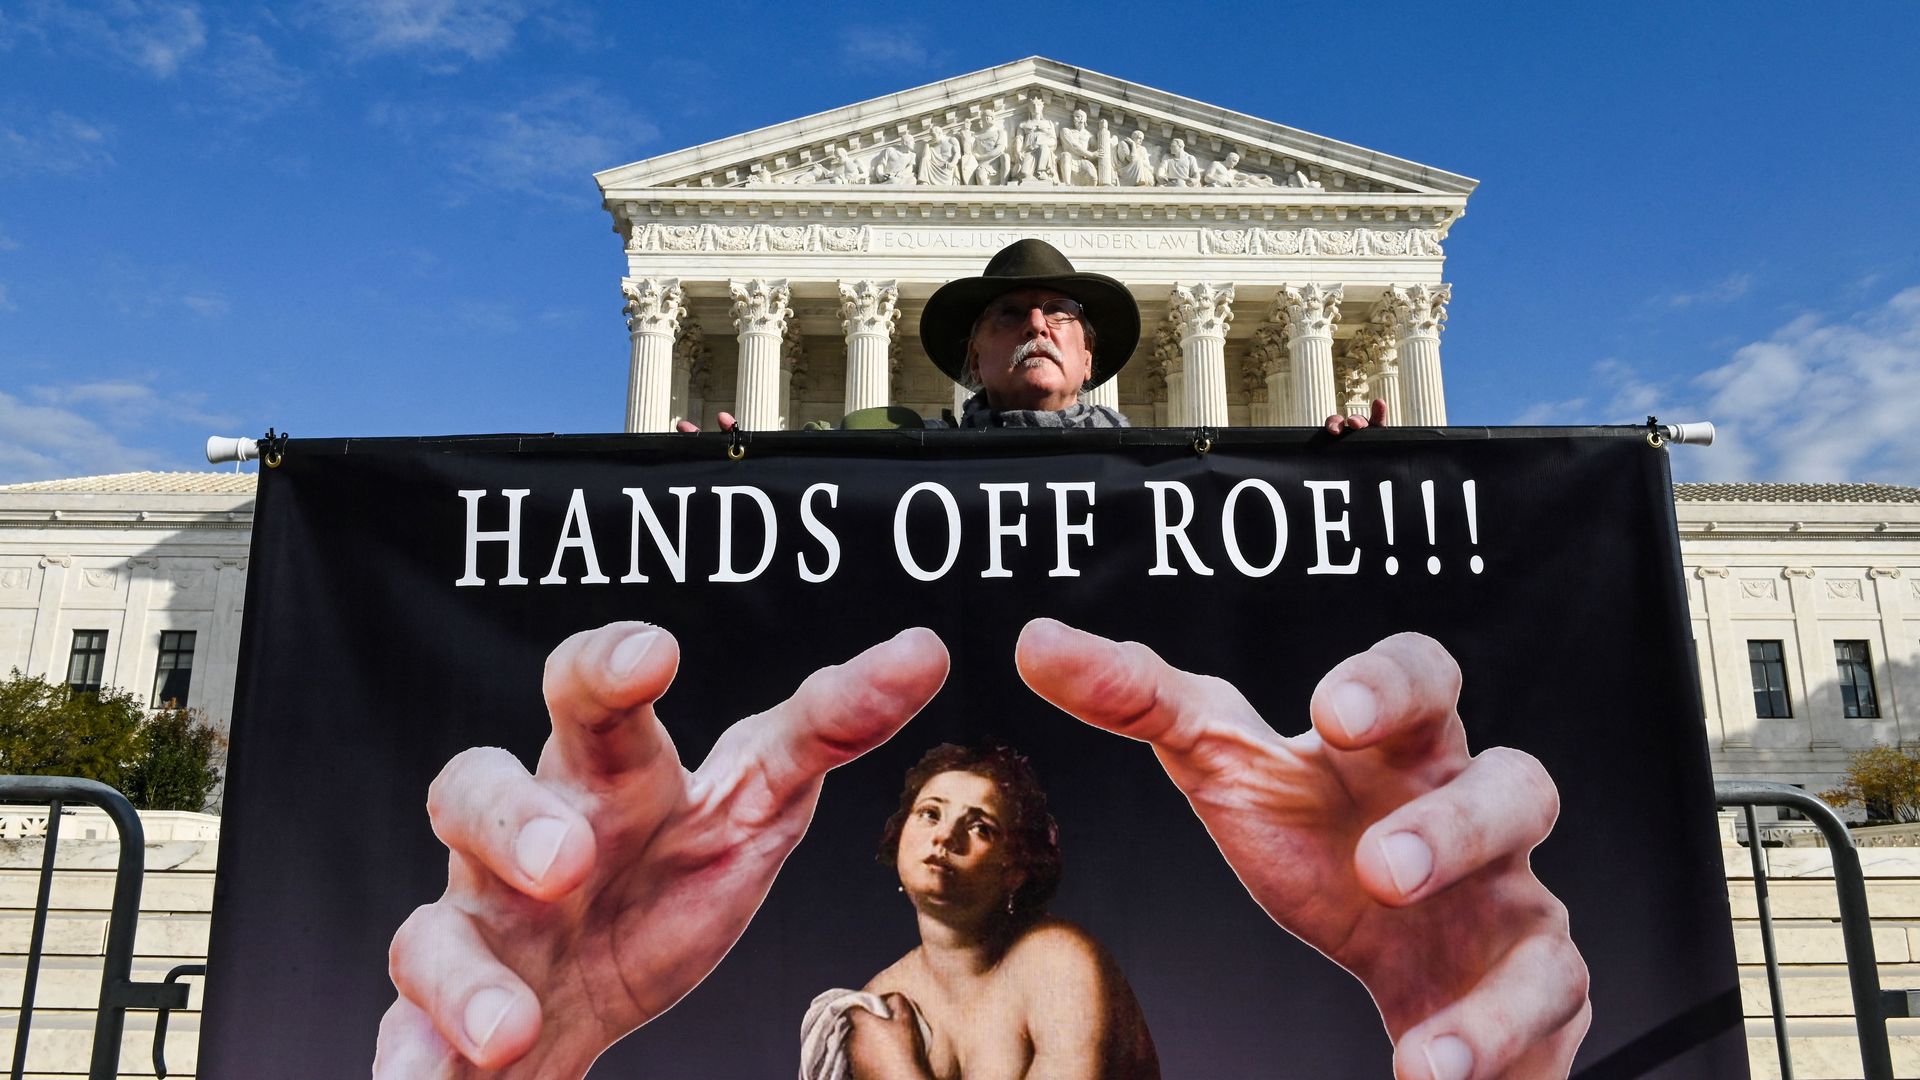 A man protesting a challenge to abortion rights is seen standing with a 